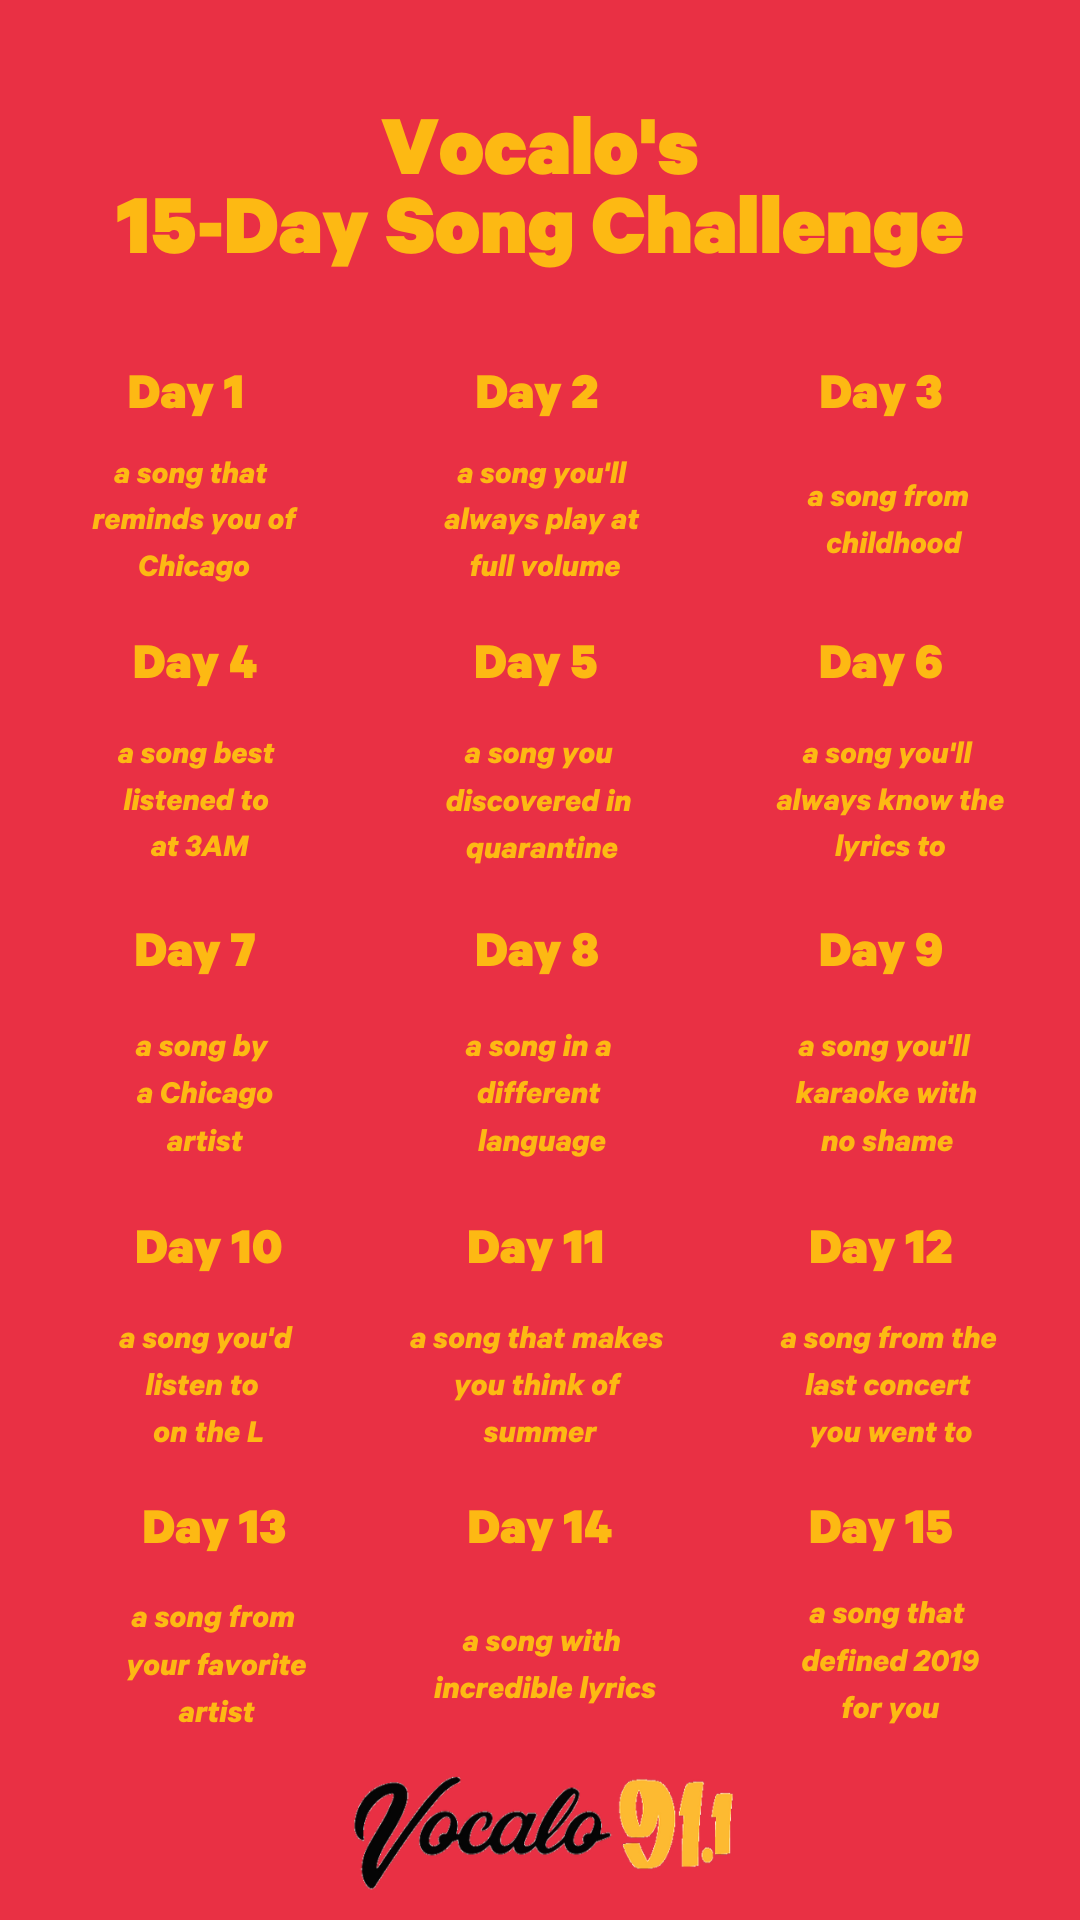 Vocalo's 15-Day Song Challenge